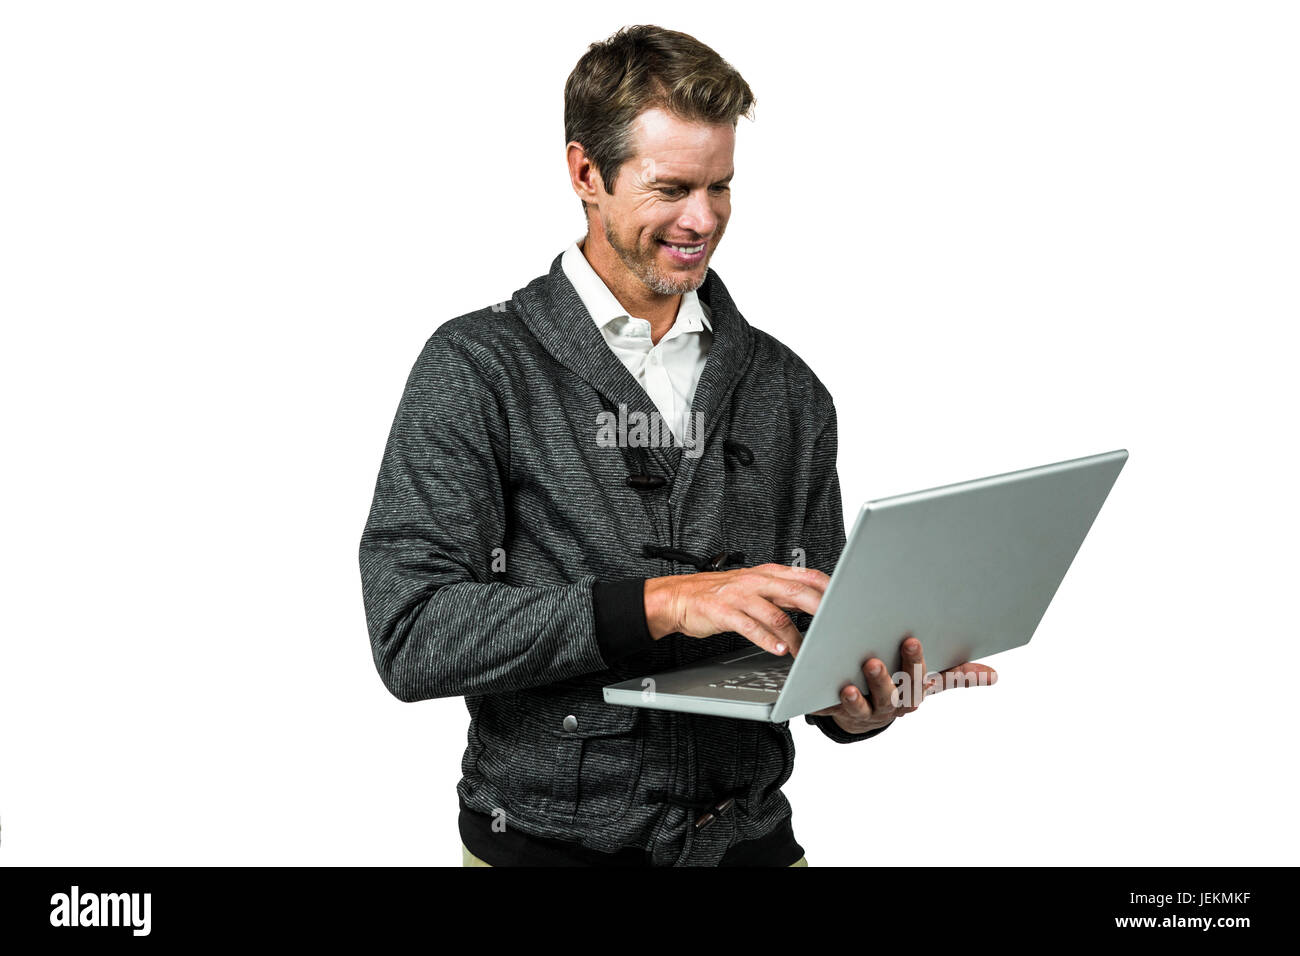 Cheerful man using laptop Banque D'Images